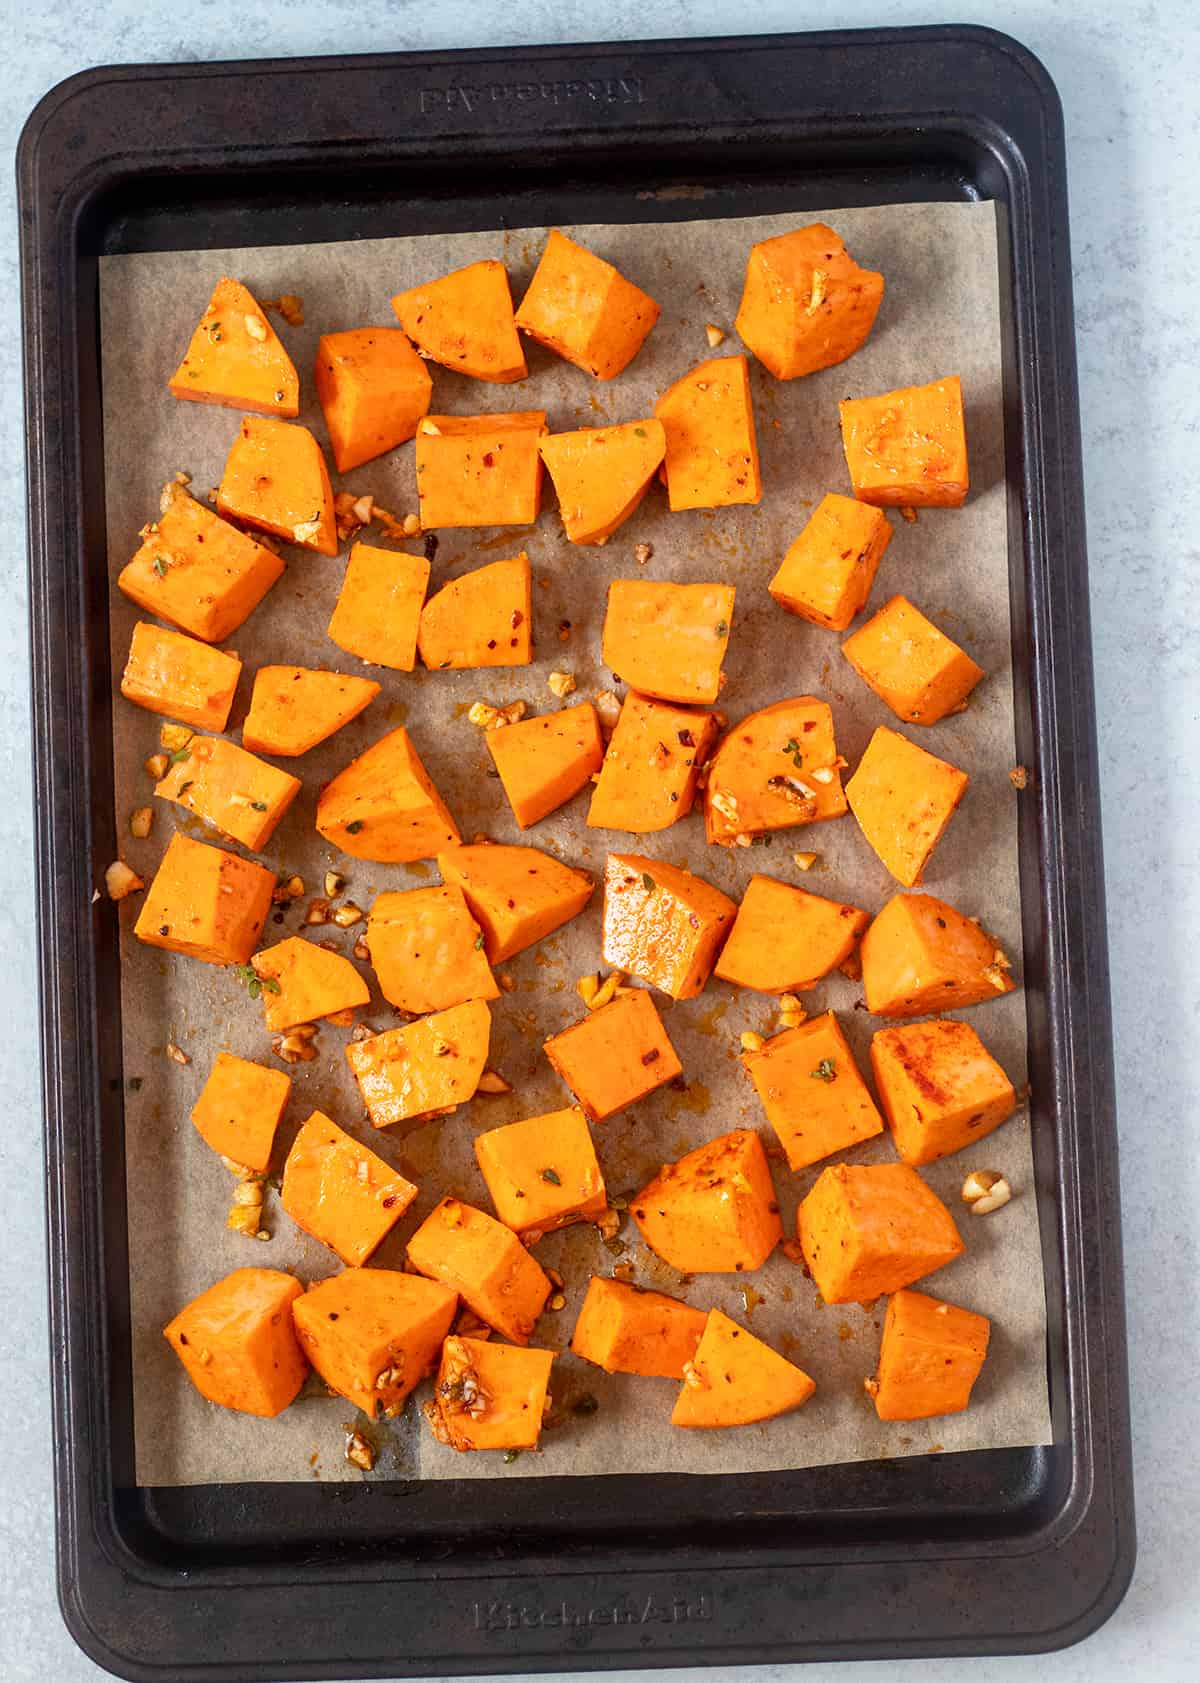 cube roasted sweet potatoes on baking sheet prior to being baked